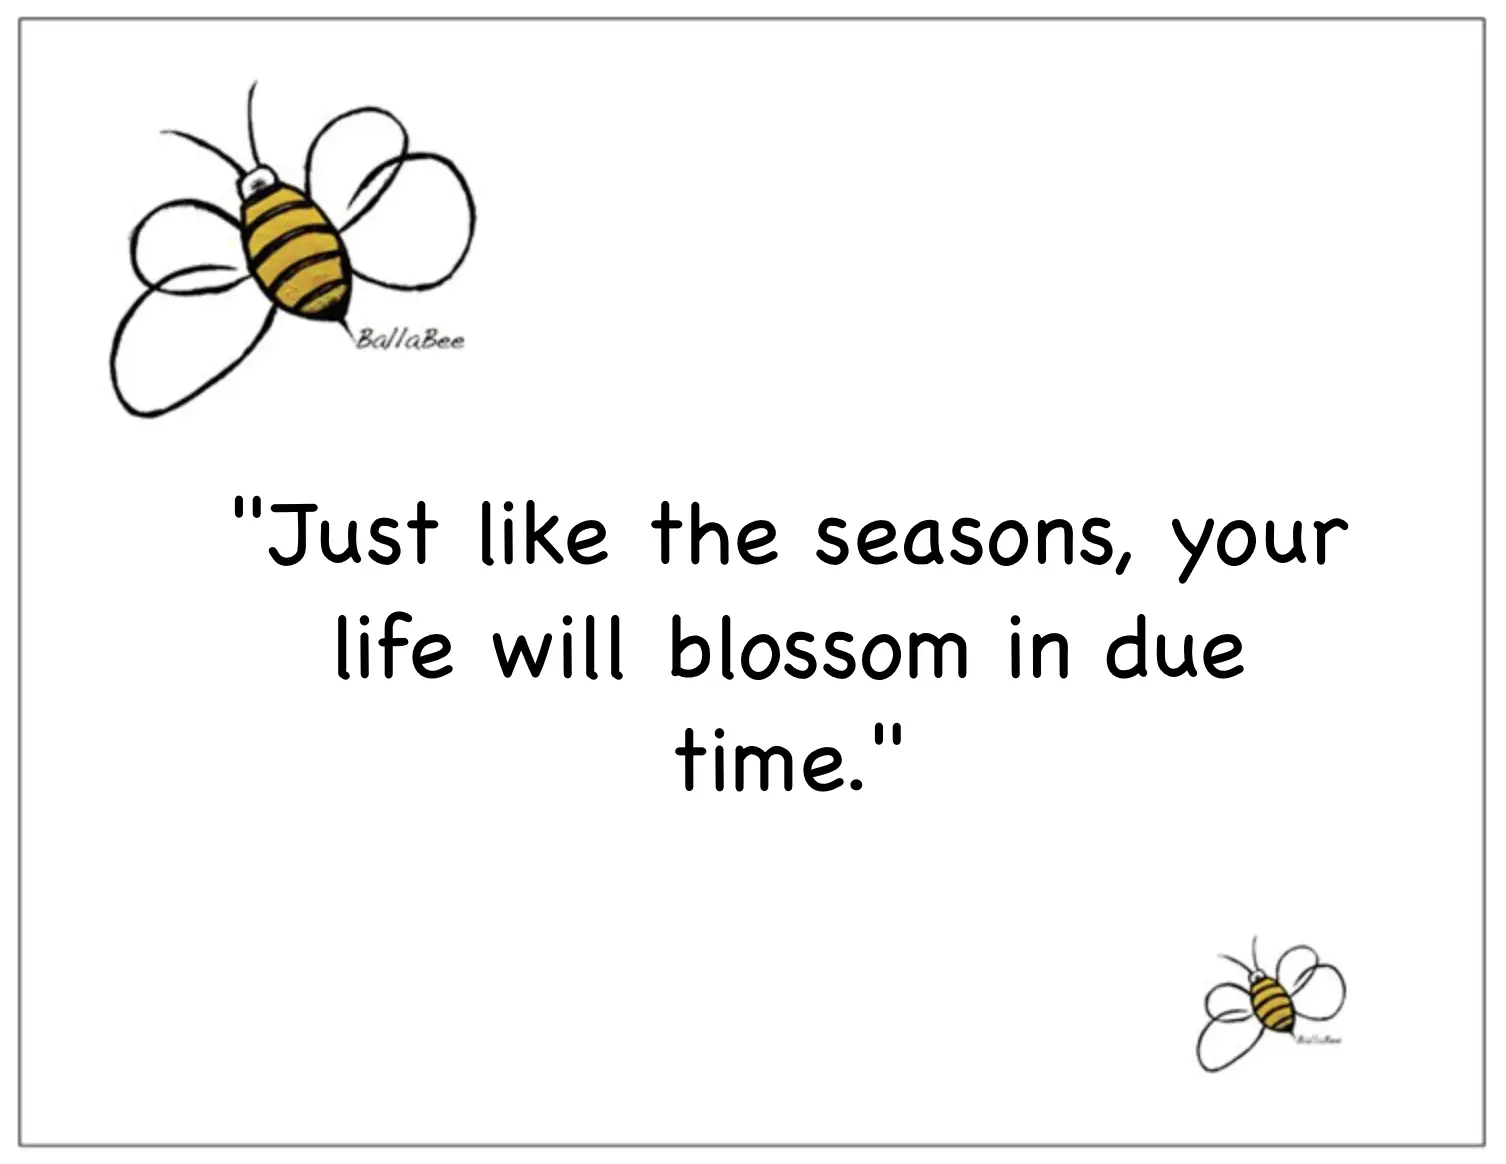 Just like the seasons, your life will blossom in due time